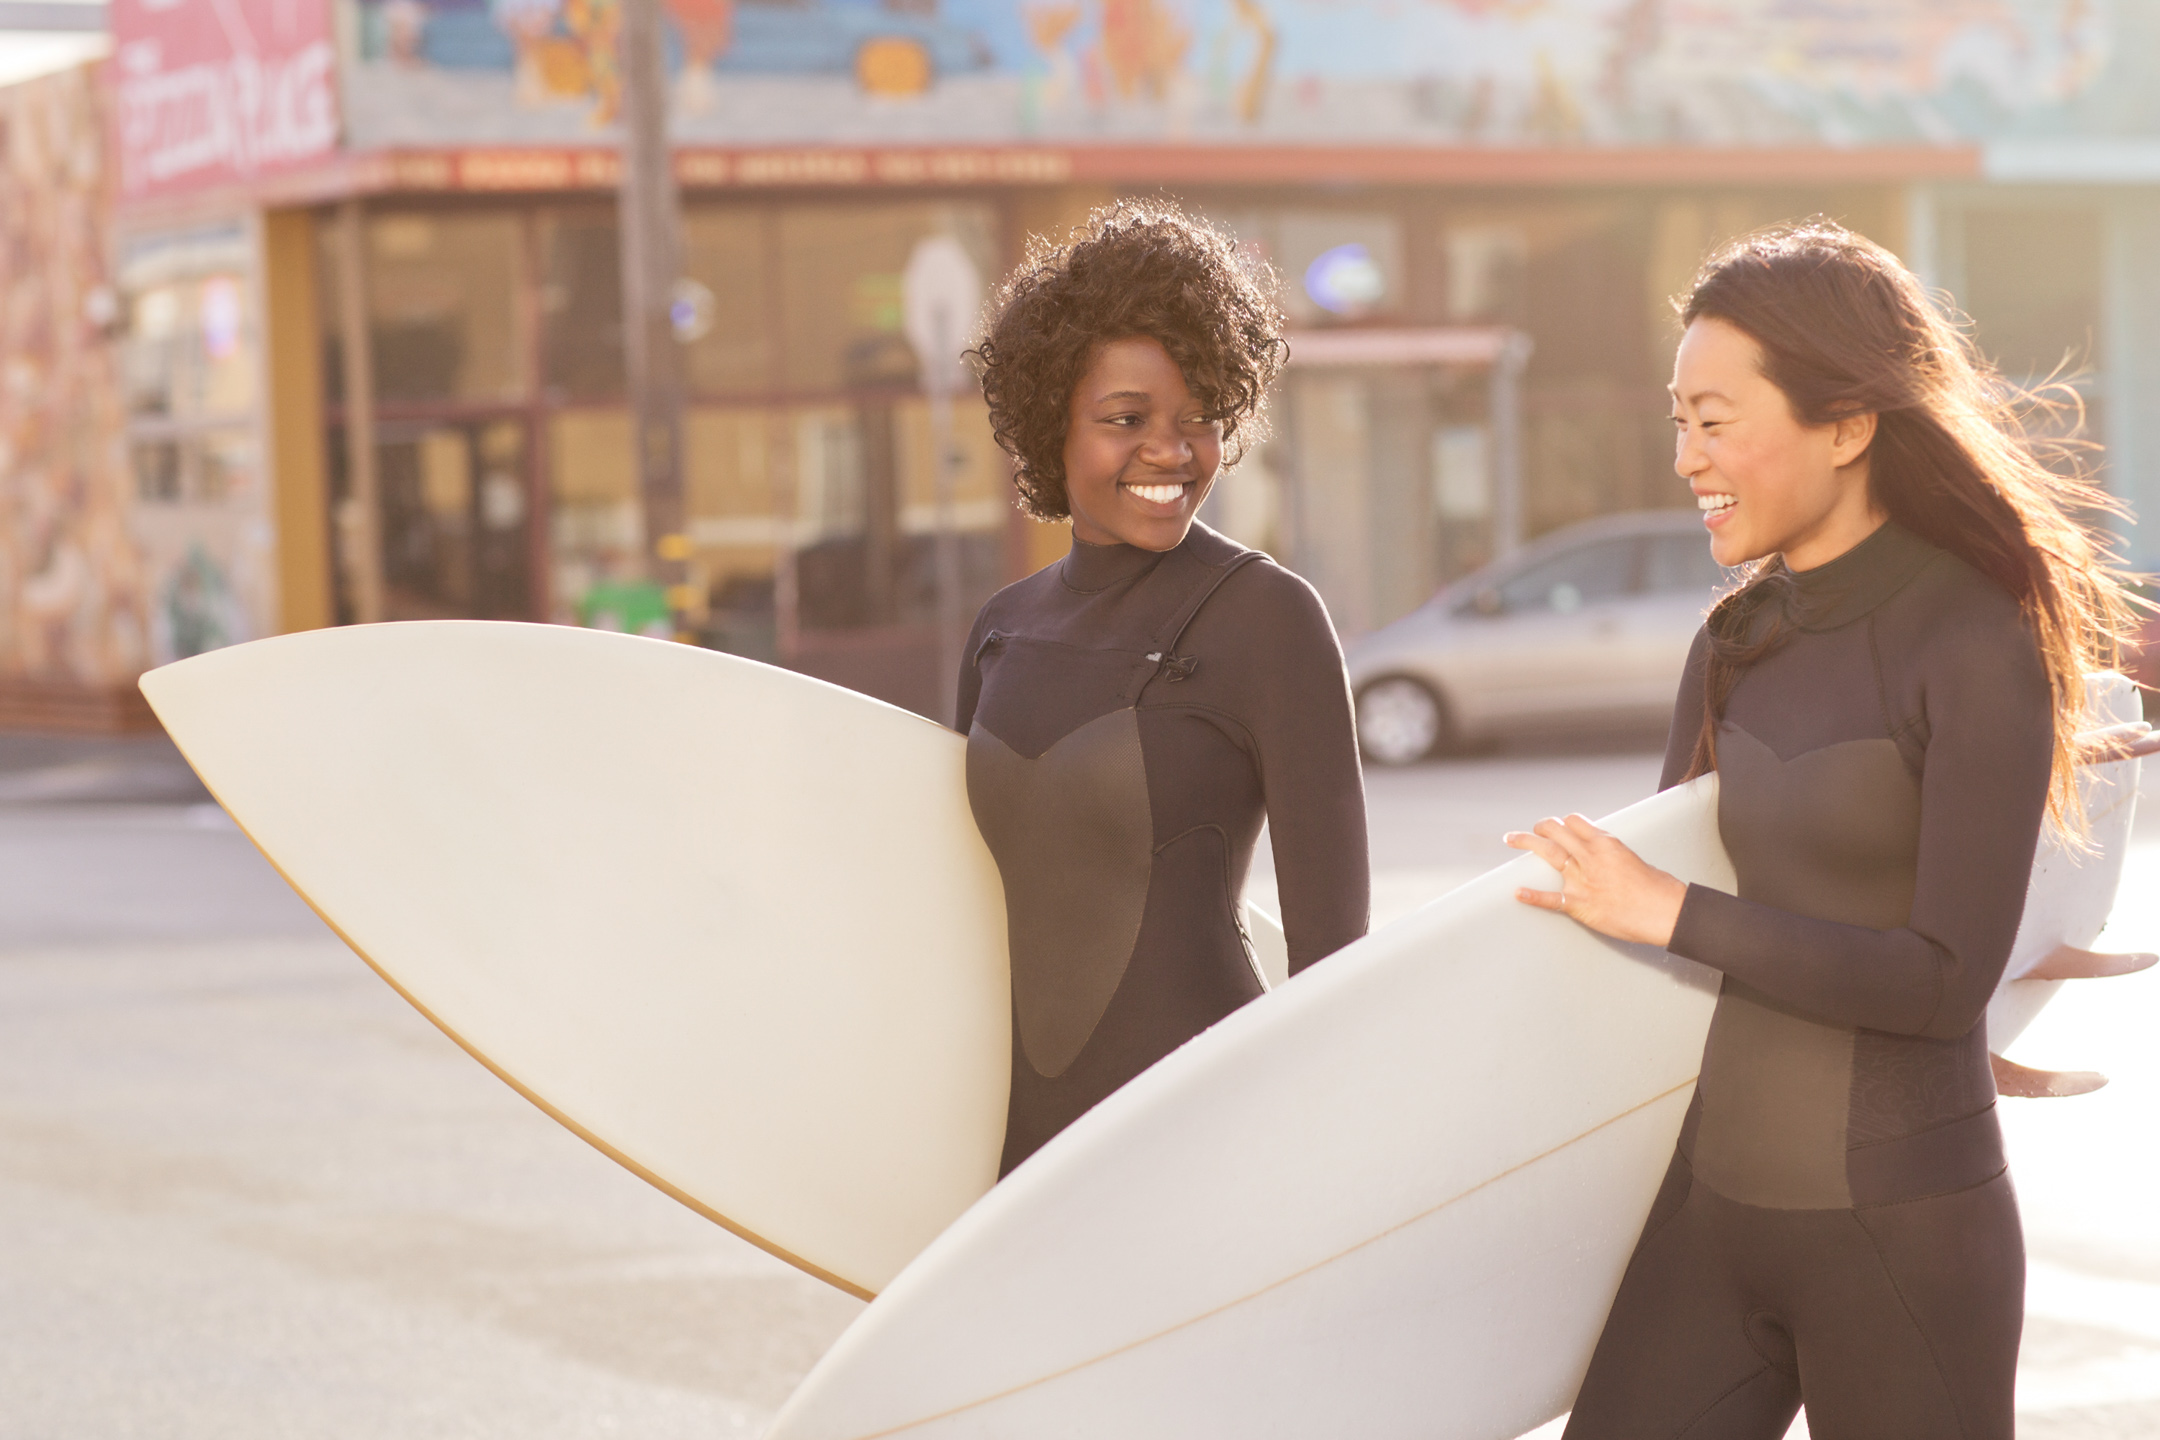 Two women walk through the streets of San Francisco with surf boards, on their way to the beach